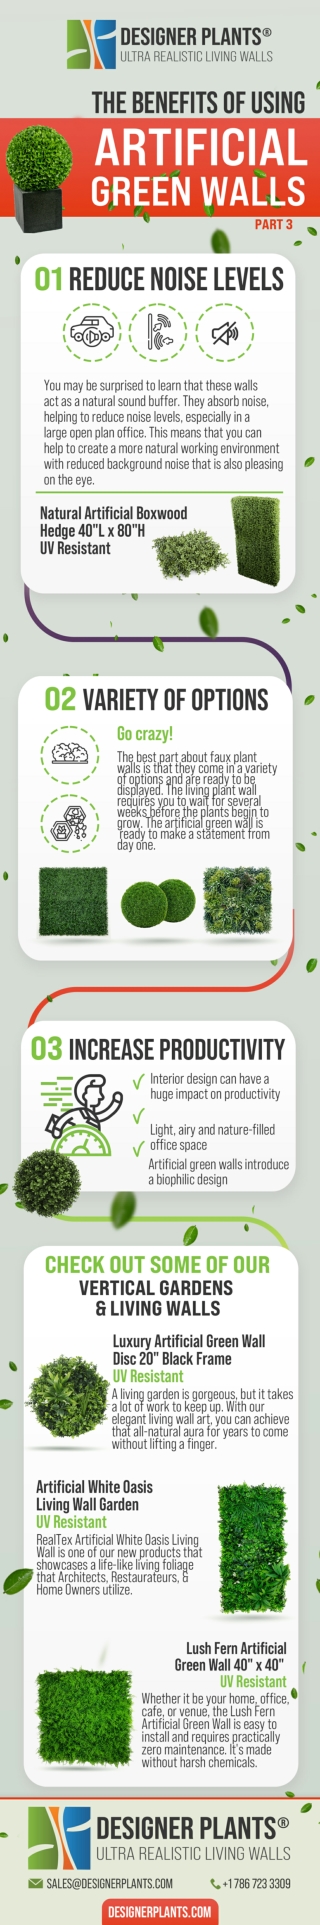 The Benefits of Using Artificial Green Walls - Part 3